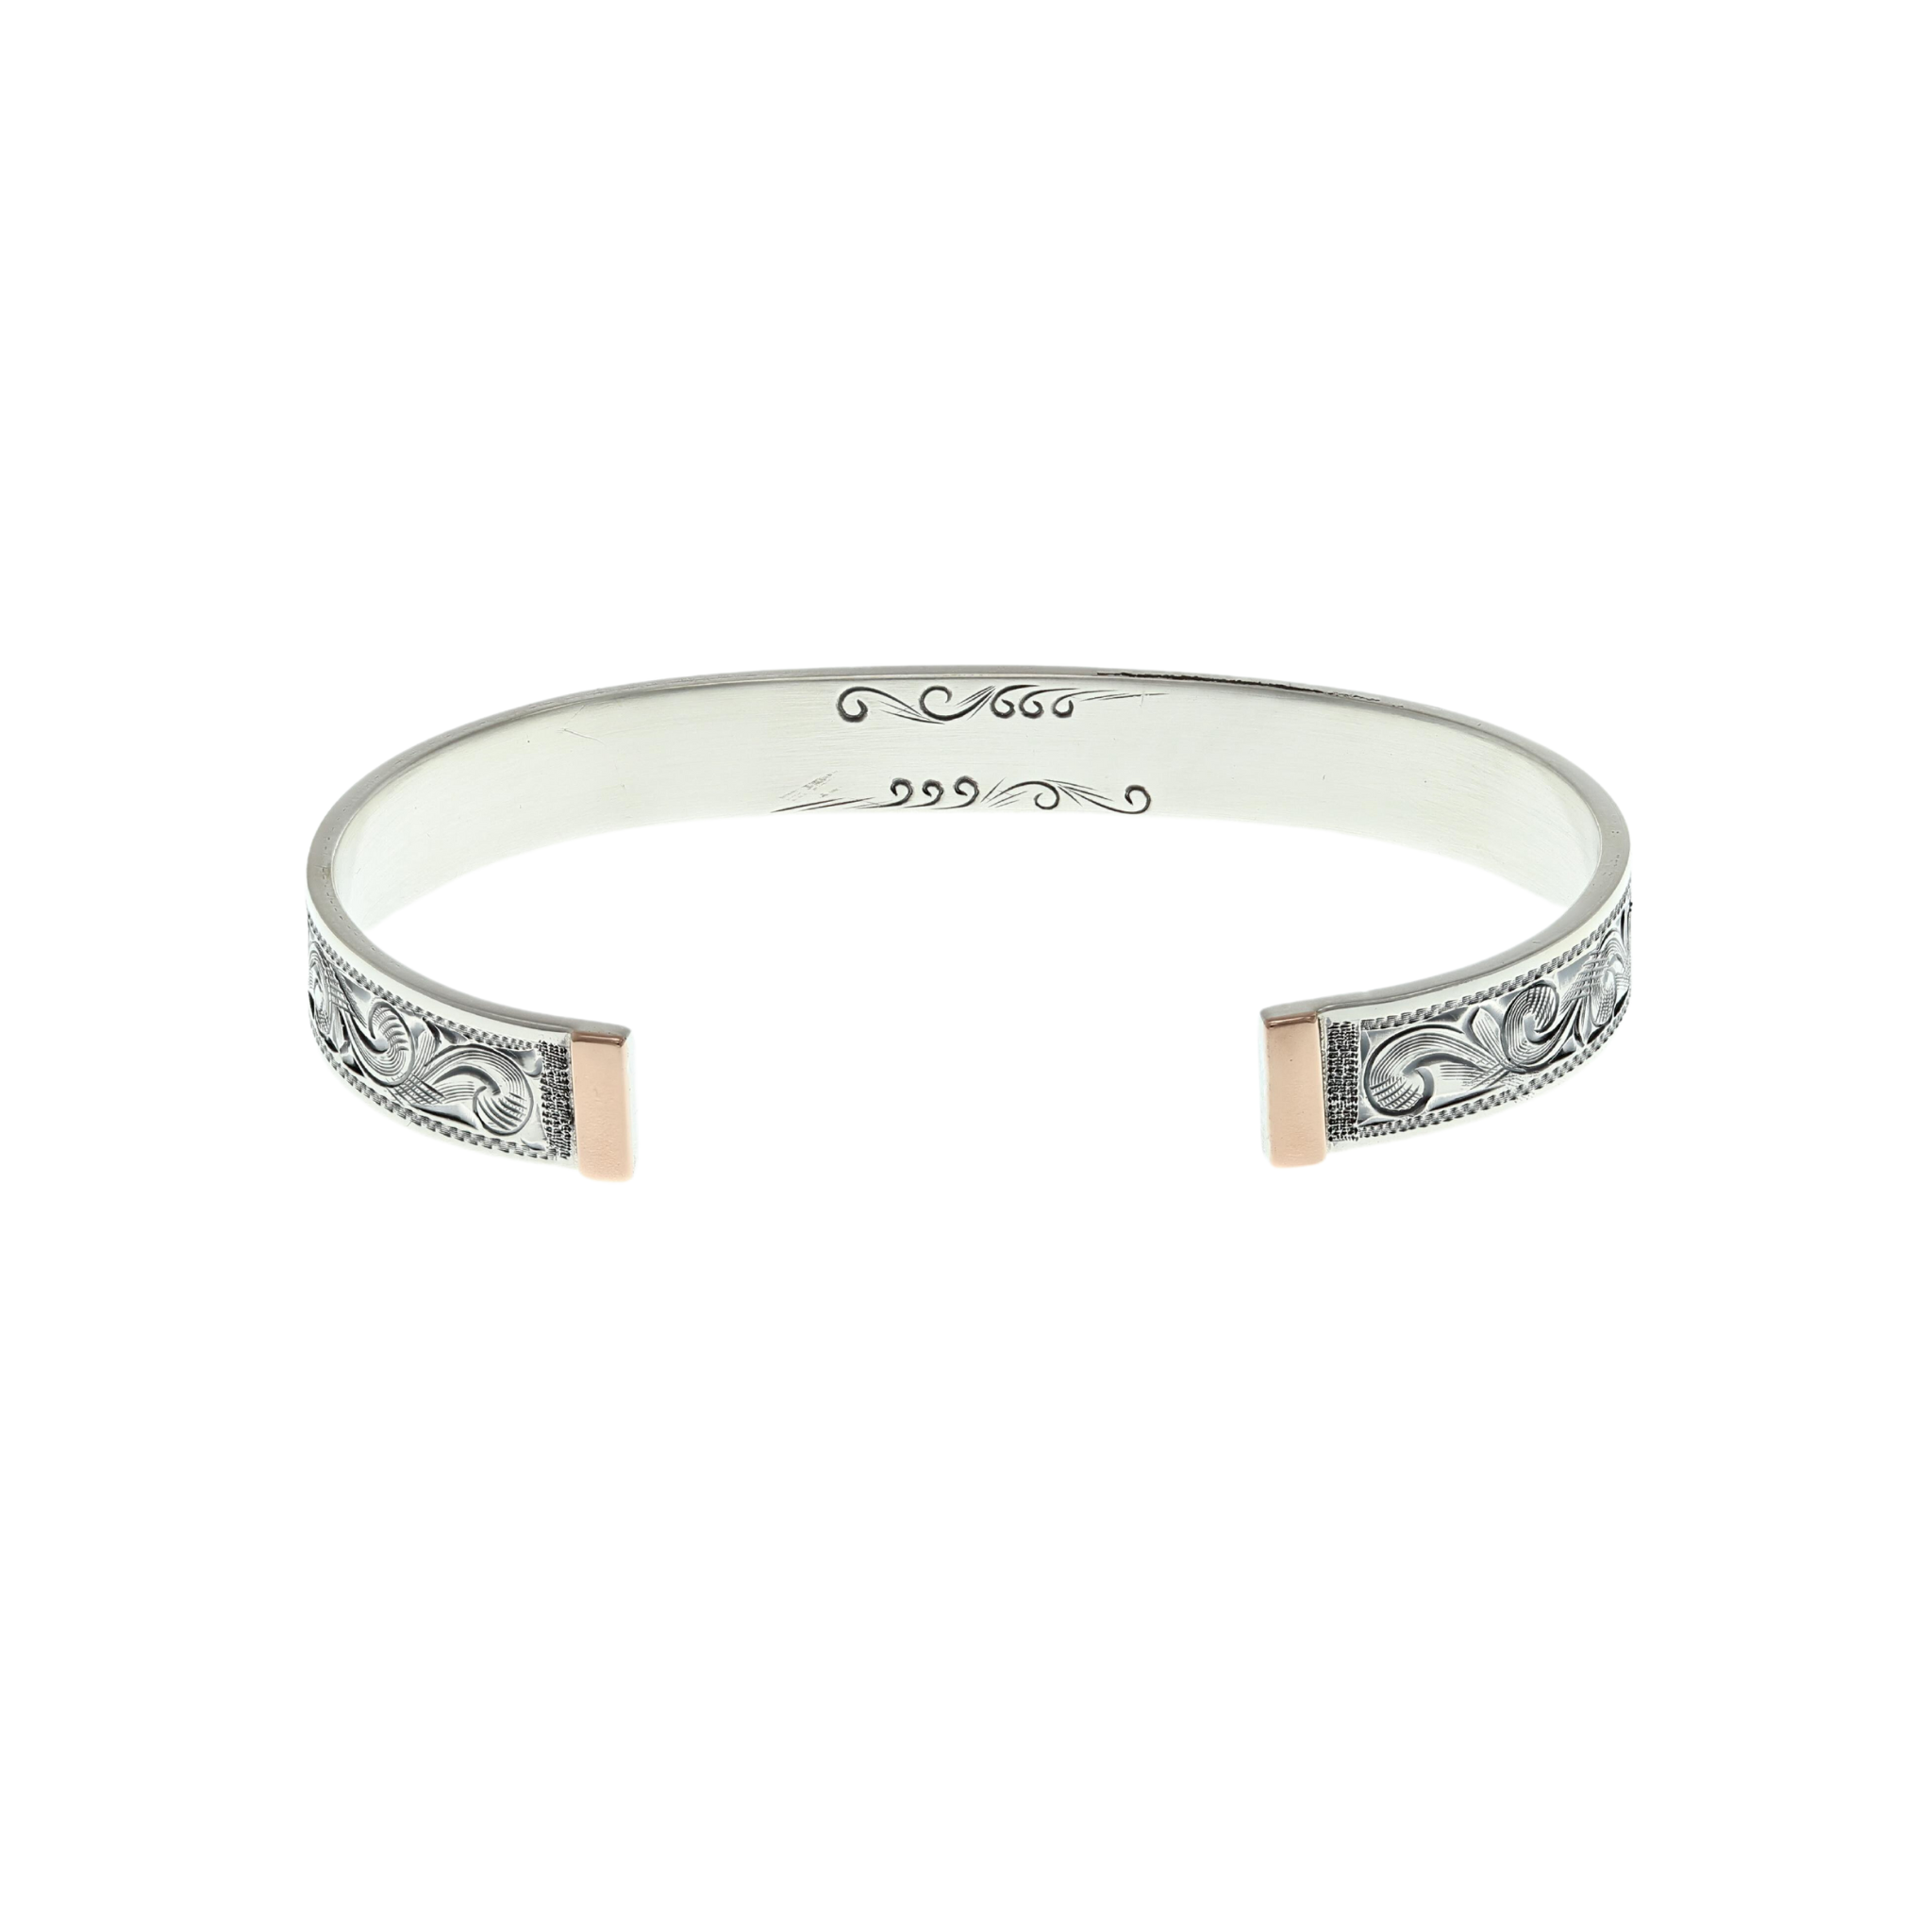 Simply Silver Sterling Silver 925 Disc Bracelet  Personalise By Engraving   Jewellery from Jon Richard UK